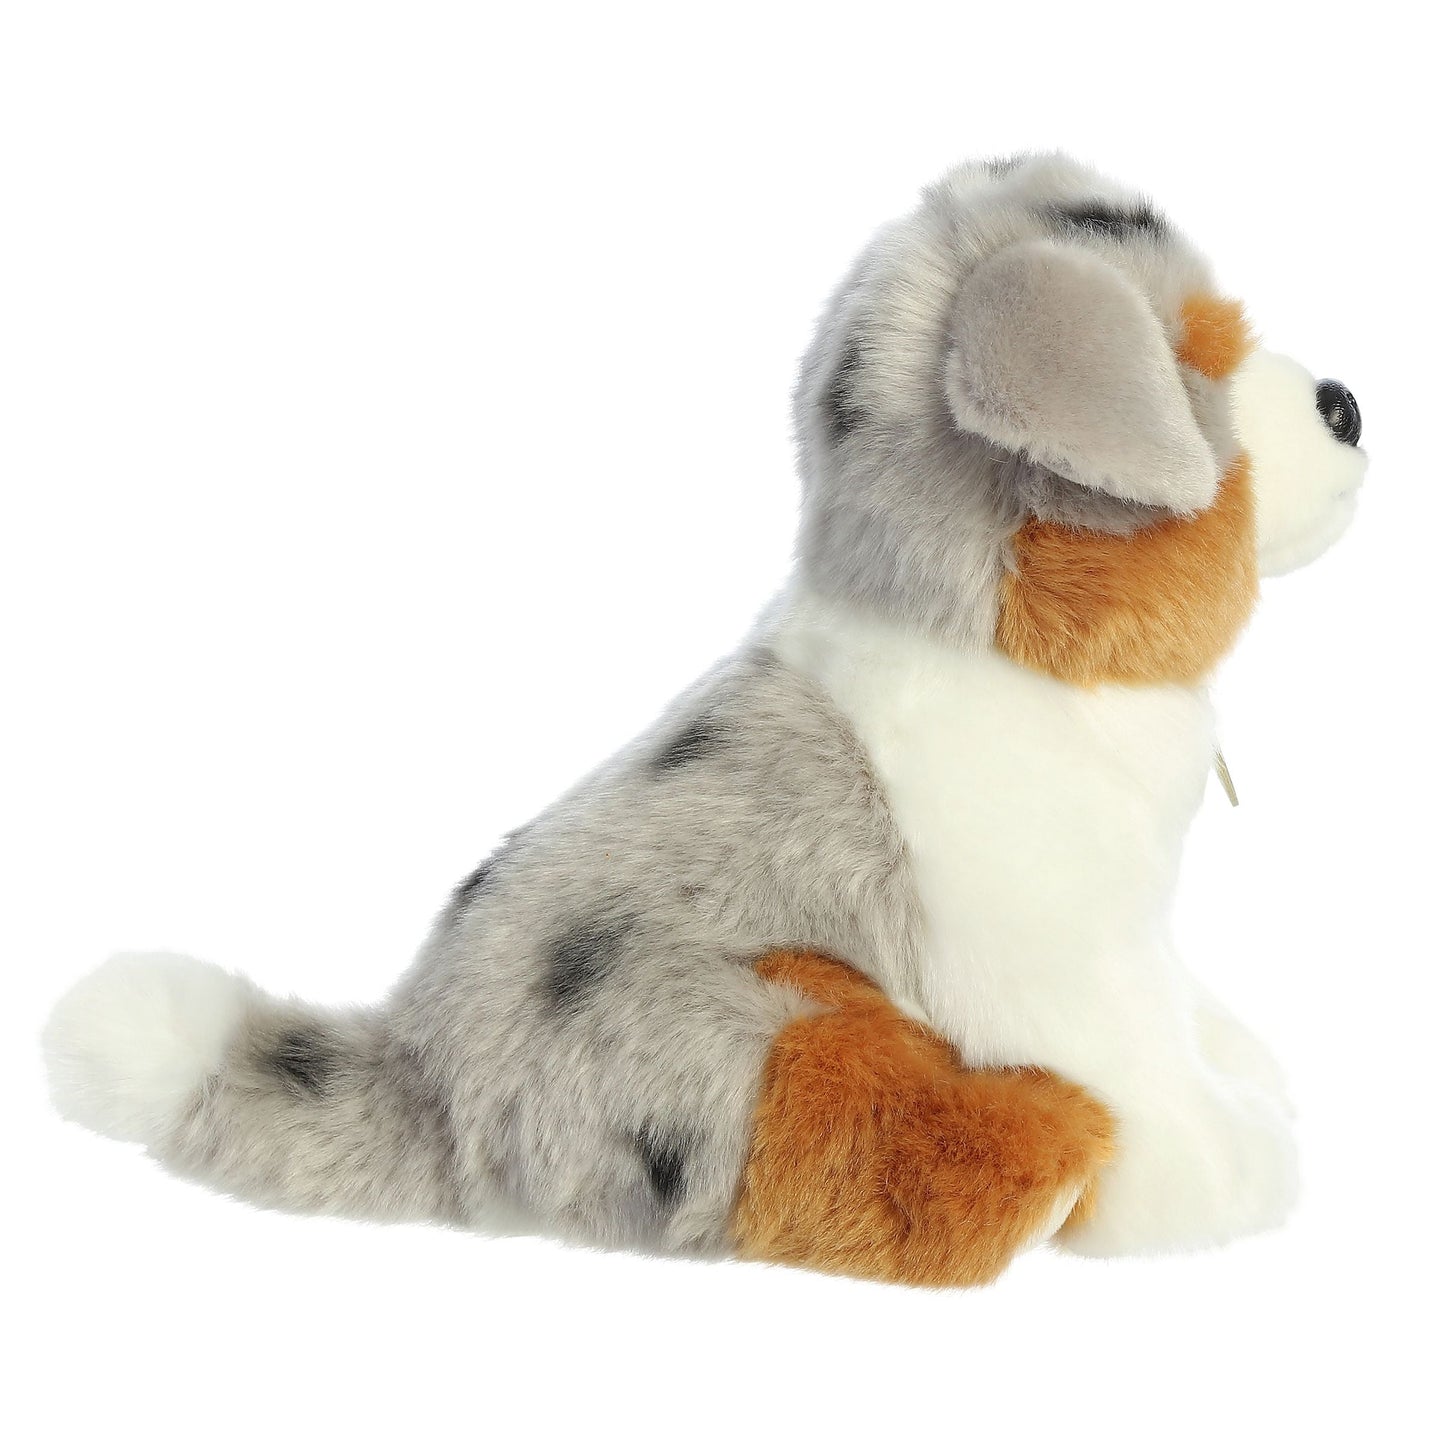 Miyoni features your favorite animals in plush form with a simultaneously realistic and adorable design! This Aussie pup is an Australian Shepherd breed with a mixed color coat and adorable puppy face.